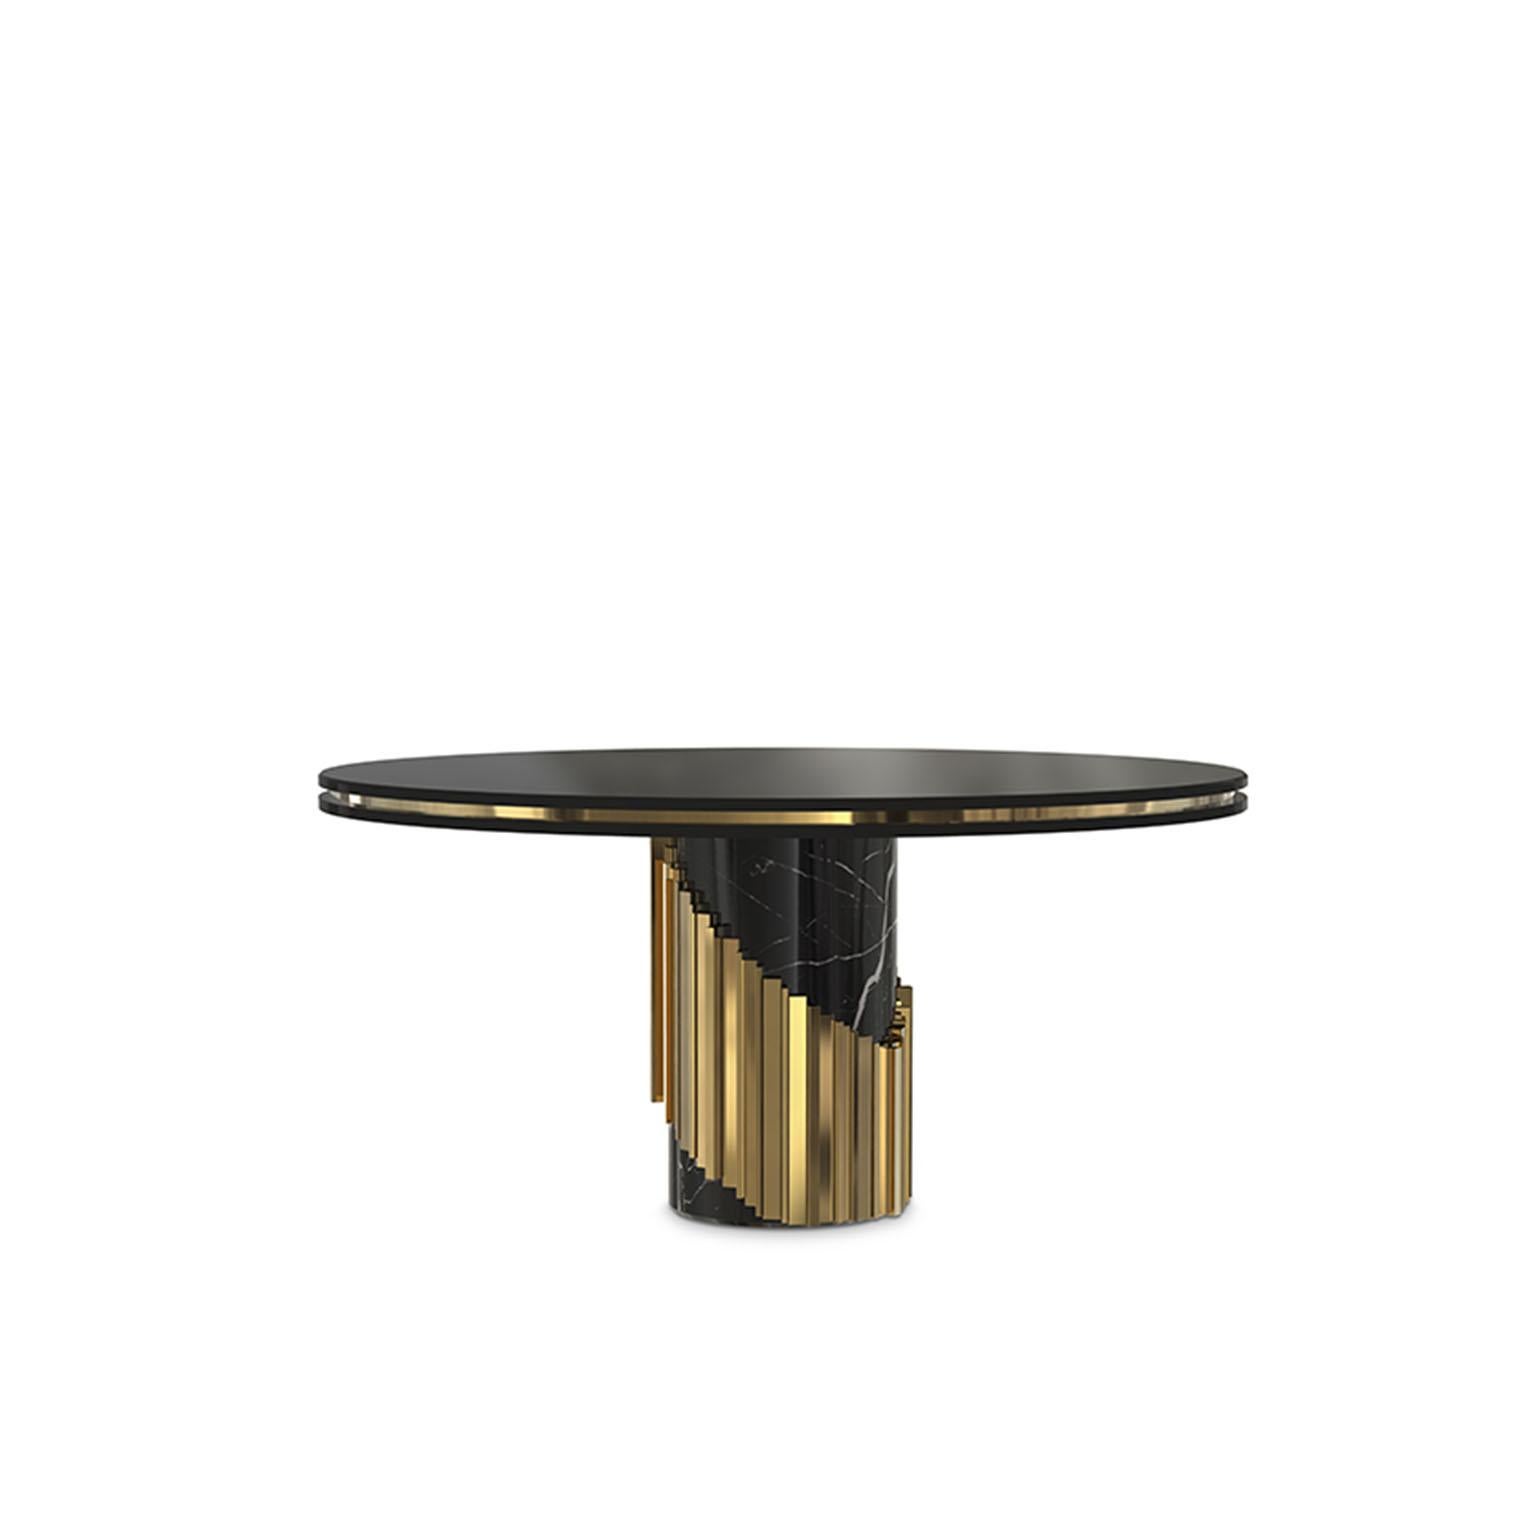 The creation of Littus dining table was made in order to strengthen a unique concept. This luxury dining table has come to symbolize the spiral, is a curve in the space, which runs around a center in a special way like the great decisions are taken